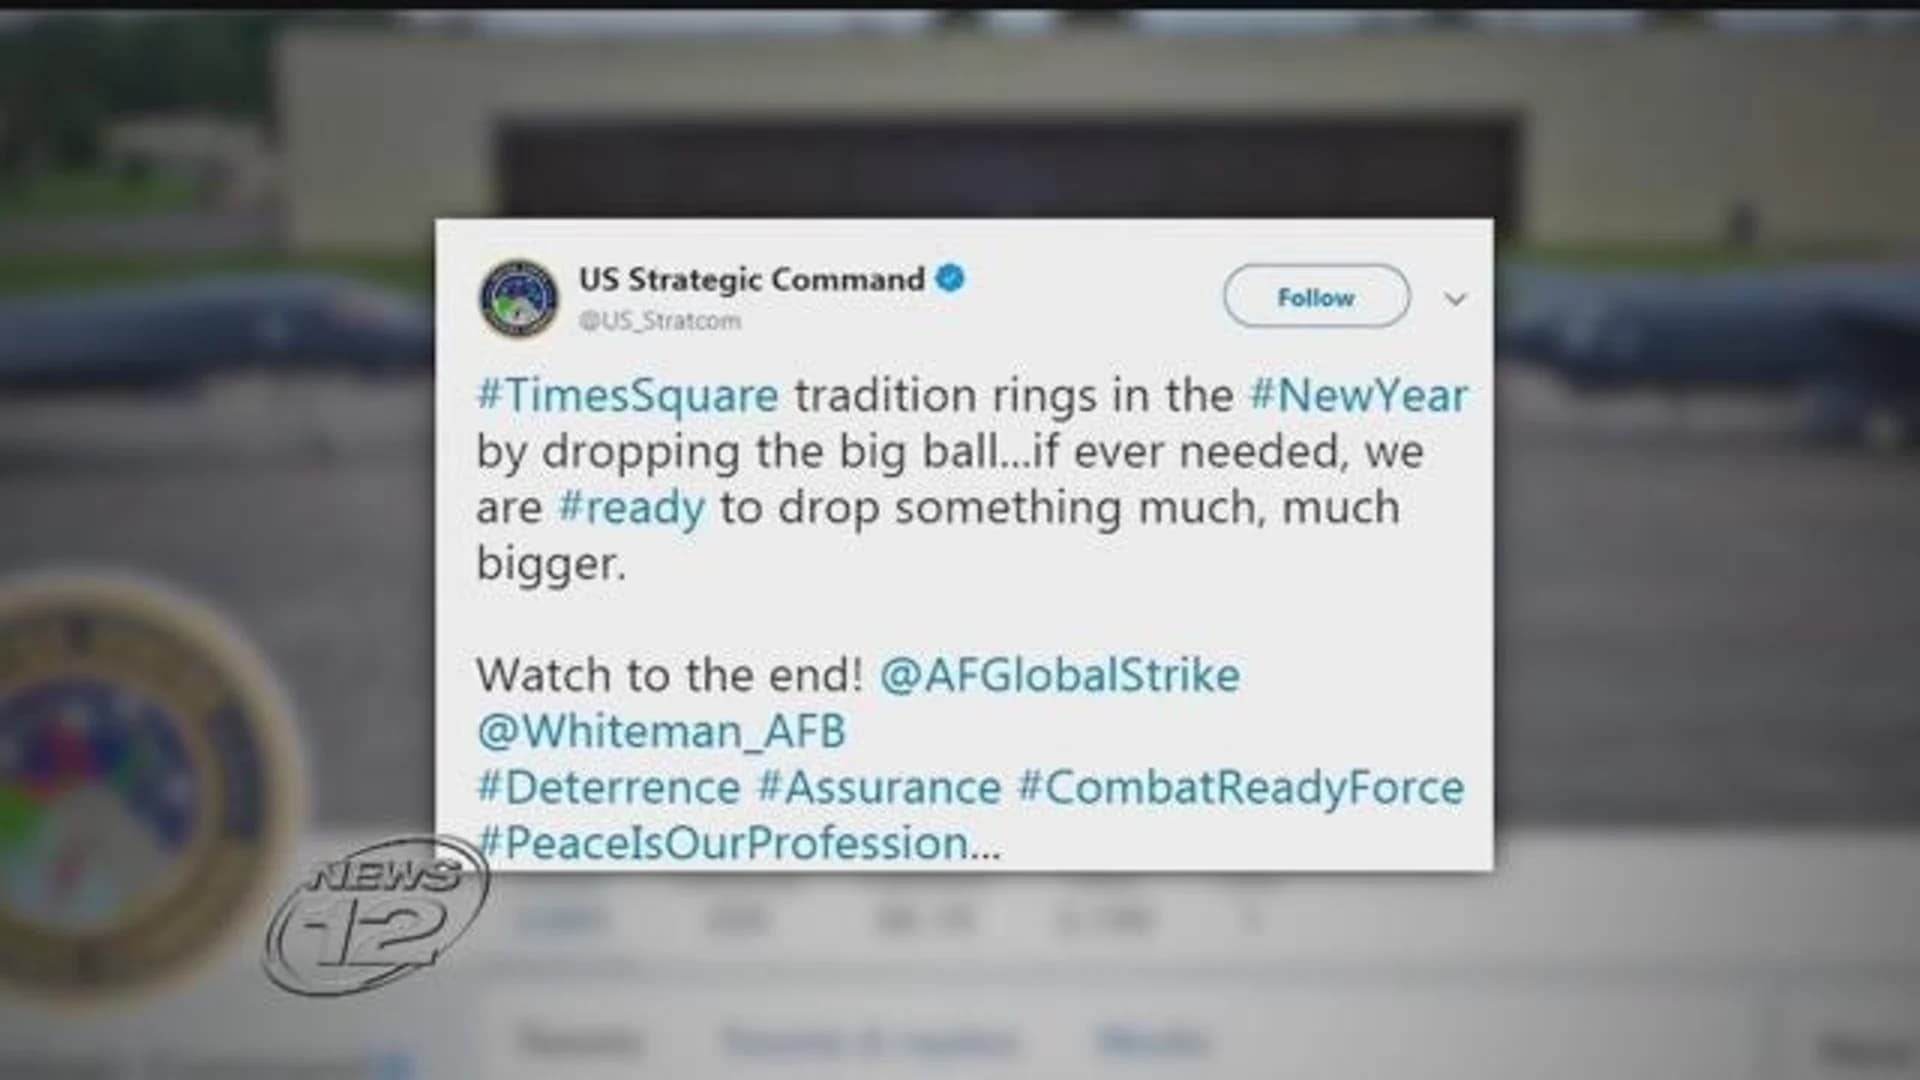 Strategic Command apologizes for tweet about dropping bomb